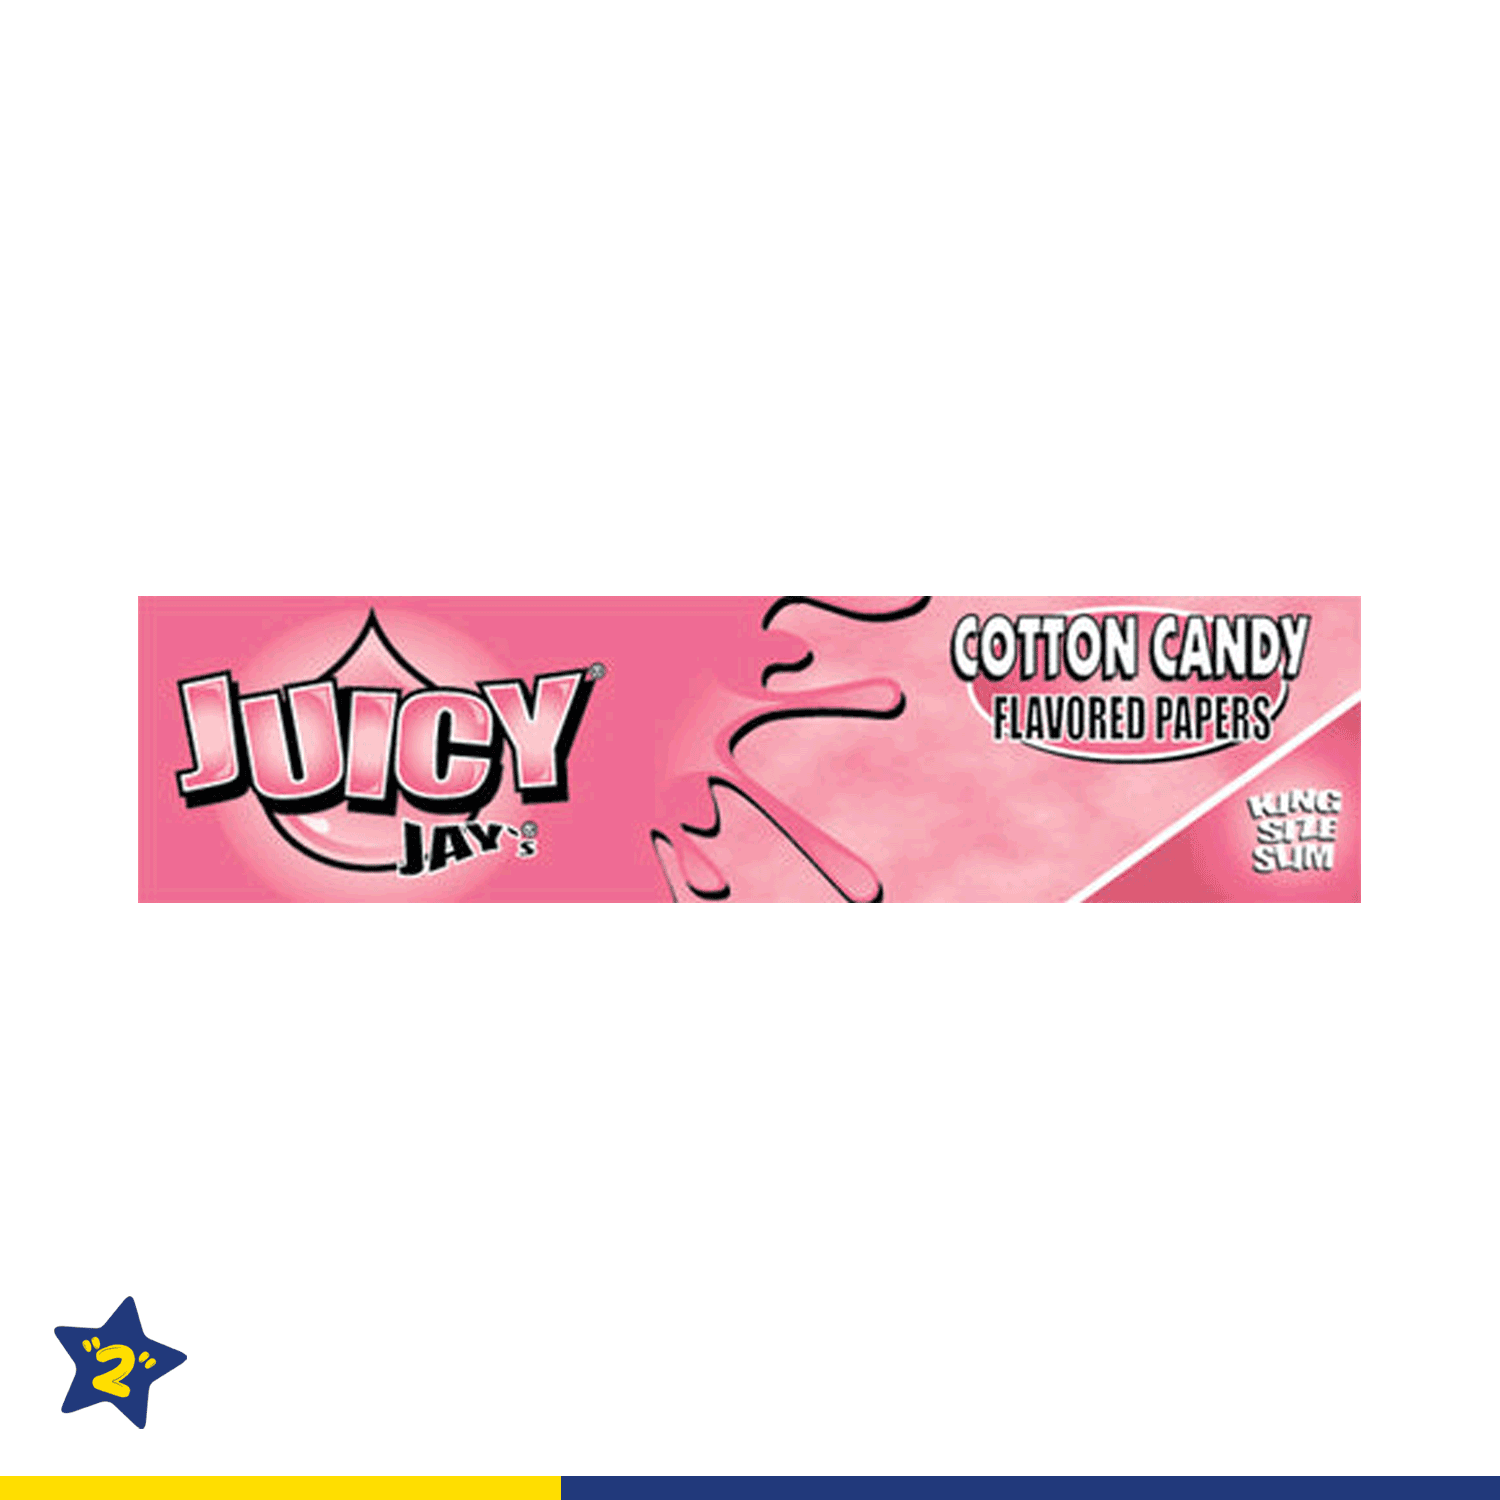 Juicy Jay's Rolling Paper Cotton Candy